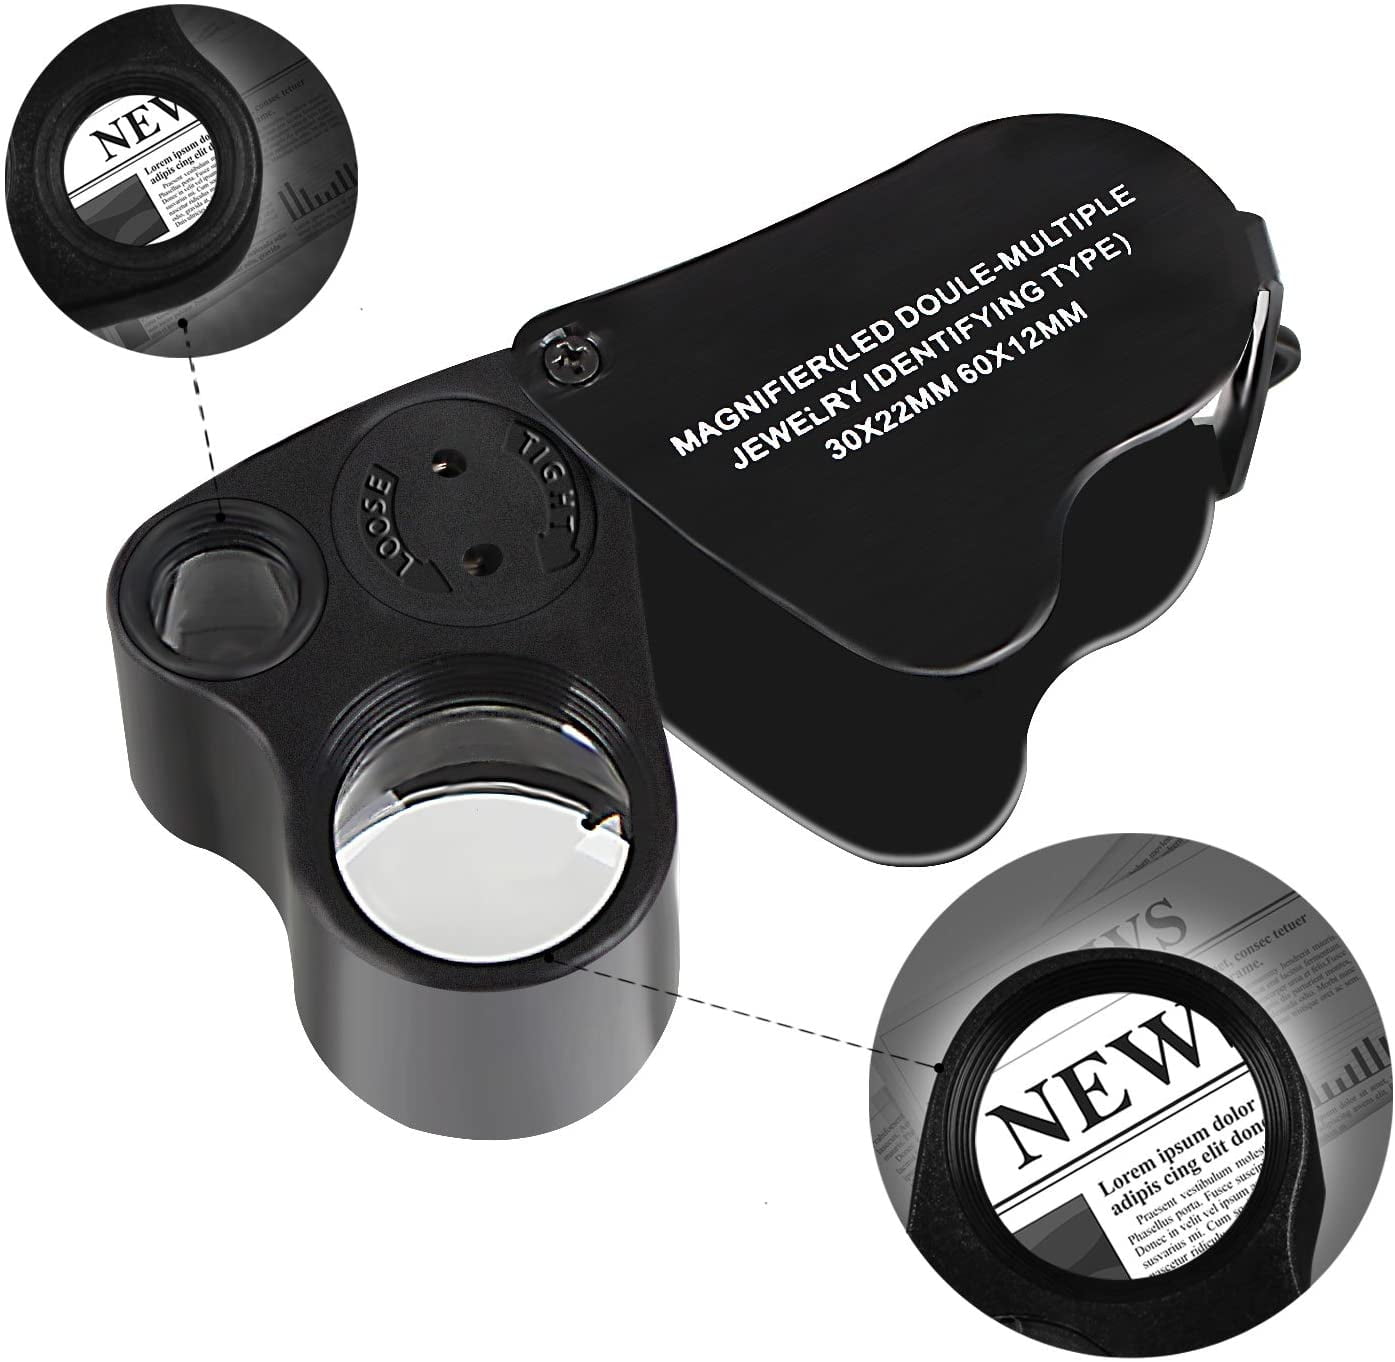 Black, White 2 Lens Design 6 Pieces 30X 60X Jewelry Magnifiers Foldable Loupe Illuminated Eye Loupe Portable Jewelry Magnifier with LED Light for Identifying Jewelry Gems Coins Stamps 